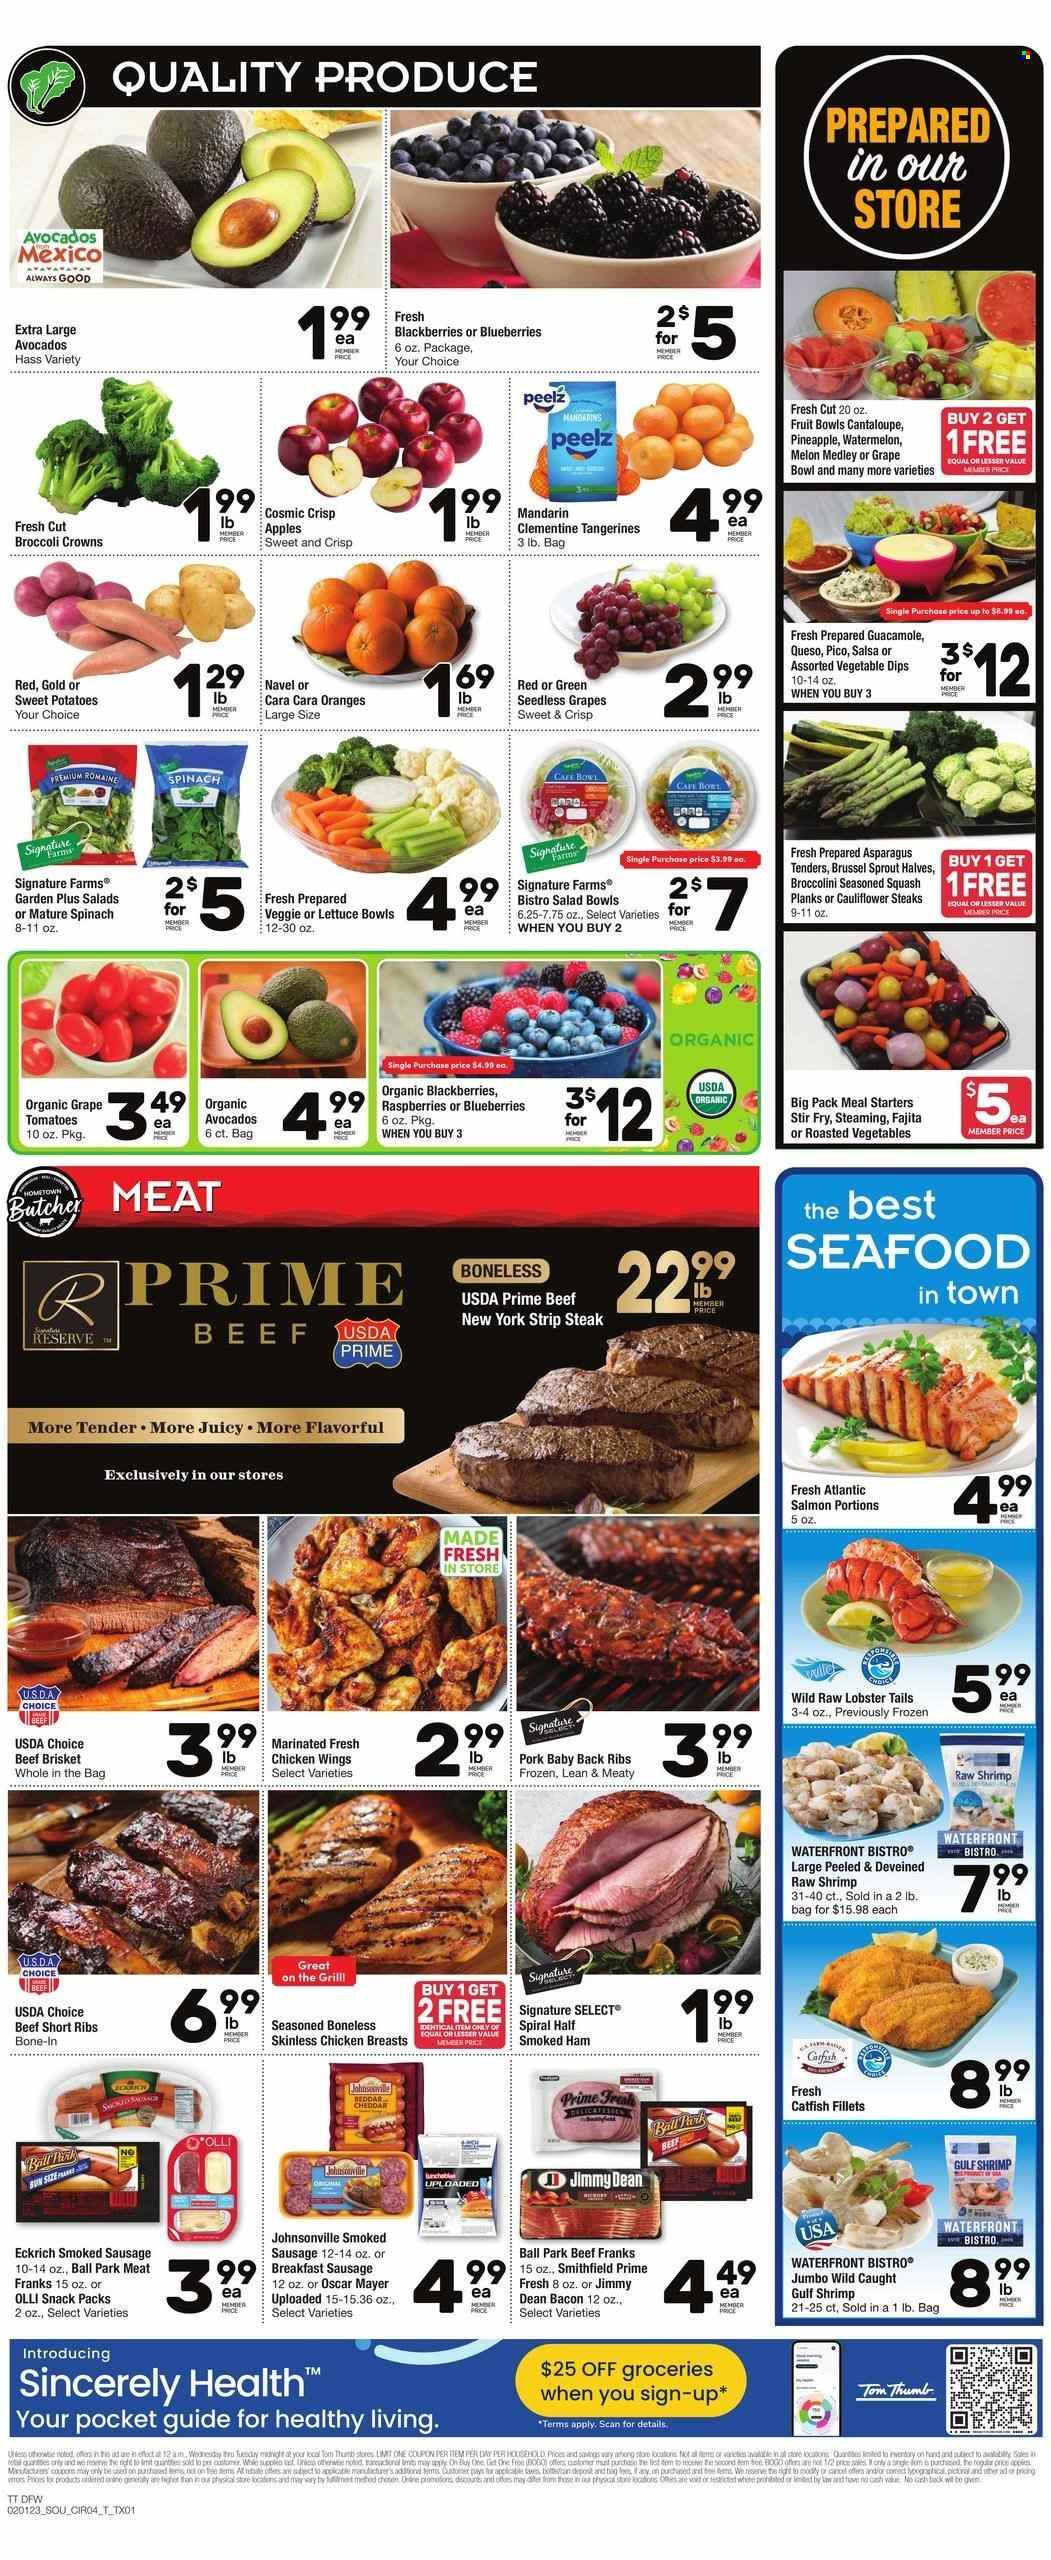 thumbnail - Tom Thumb Flyer - 02/01/2023 - 02/07/2023 - Sales products - asparagus, cauliflower, sweet potato, tomatoes, potatoes, broccolini, blackberries, blueberries, mandarines, seedless grapes, watermelon, pineapple, oranges, catfish, lobster, salmon, seafood, lobster tail, shrimps, Jimmy Dean, bacon, ham, smoked ham, Johnsonville, Oscar Mayer, sausage, smoked sausage, guacamole, chicken wings, snack, salsa, chicken breasts, beef meat, beef ribs, steak, striploin steak, beef brisket, ribs, pork meat, pork ribs, pork back ribs, tangerines, melons. Page 4.